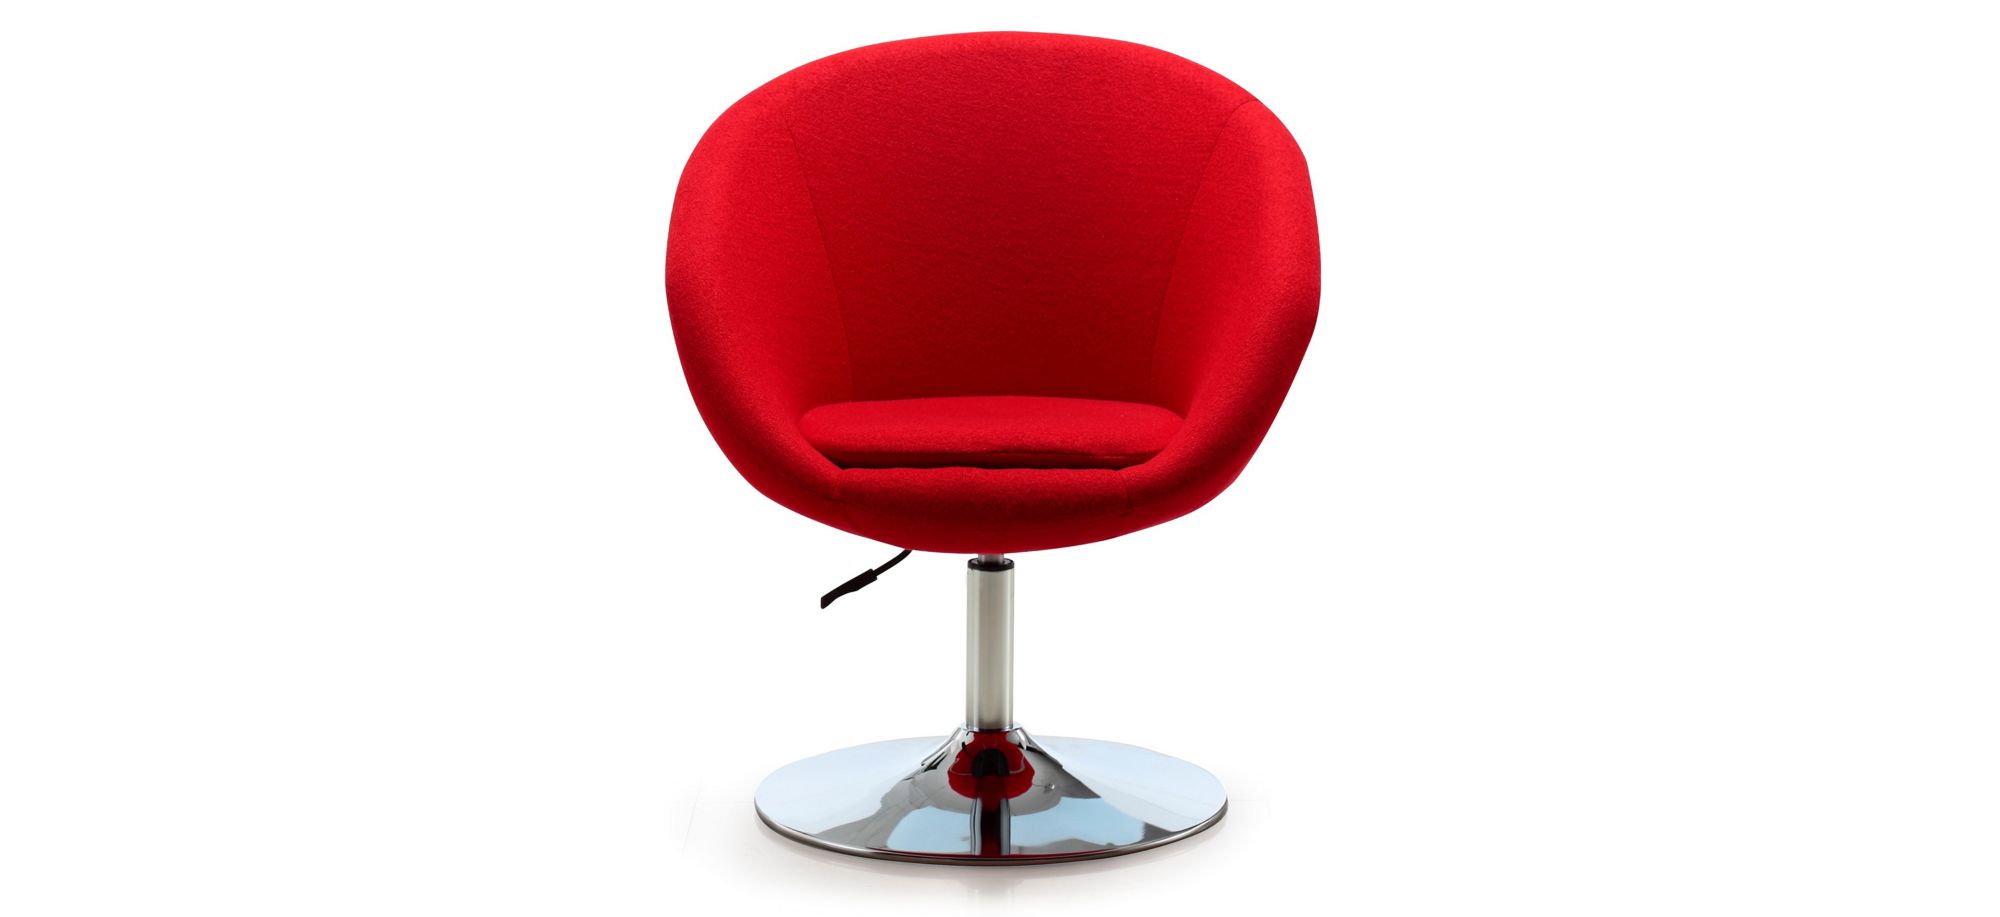 Hopper Swivel Adjustable Height Chair in Red and Polished Chrome by Manhattan Comfort